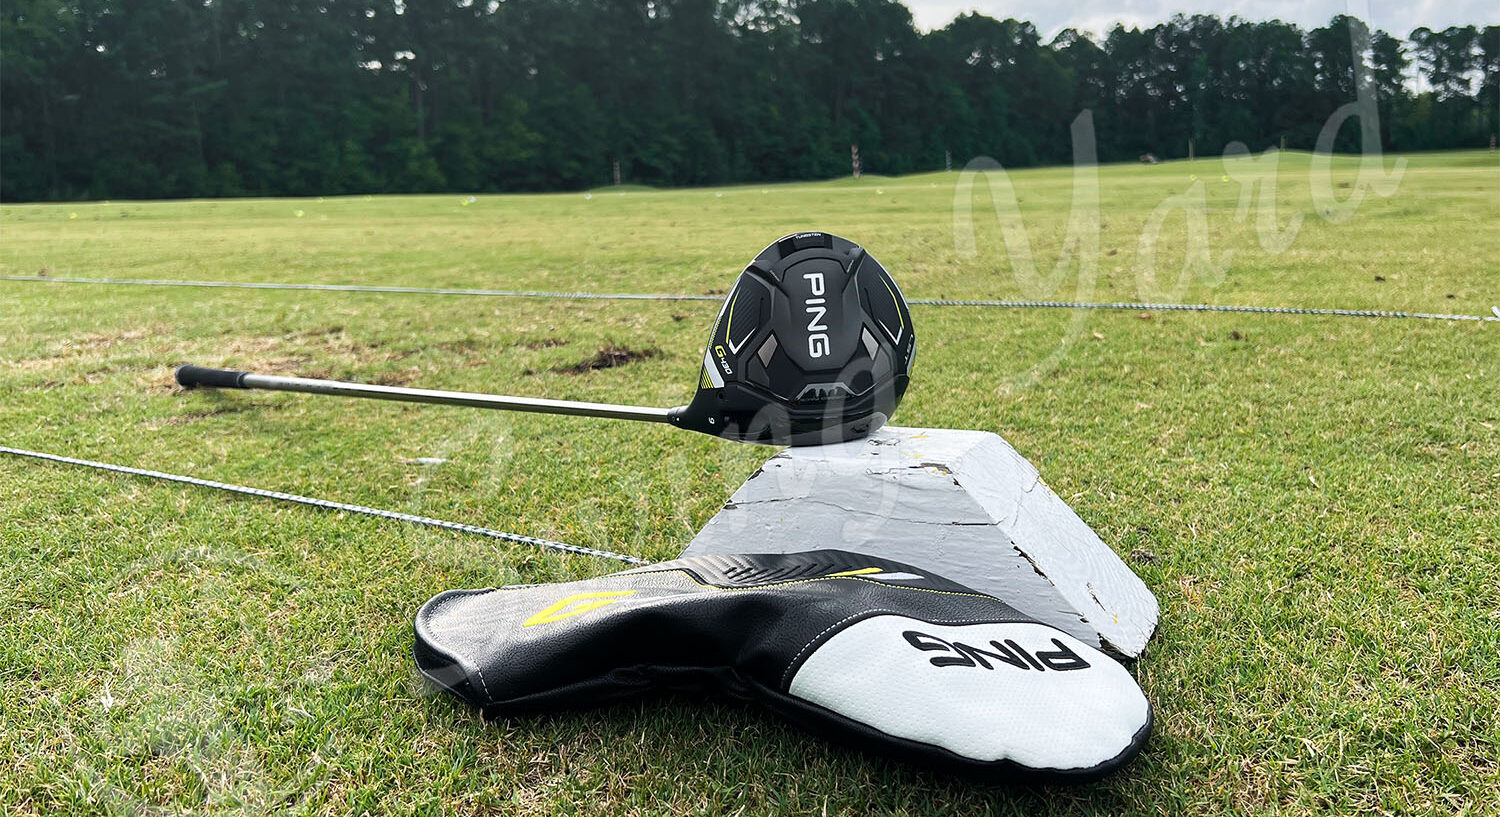 The Ping G430 LST Driver and headcover in the grass at the golf course